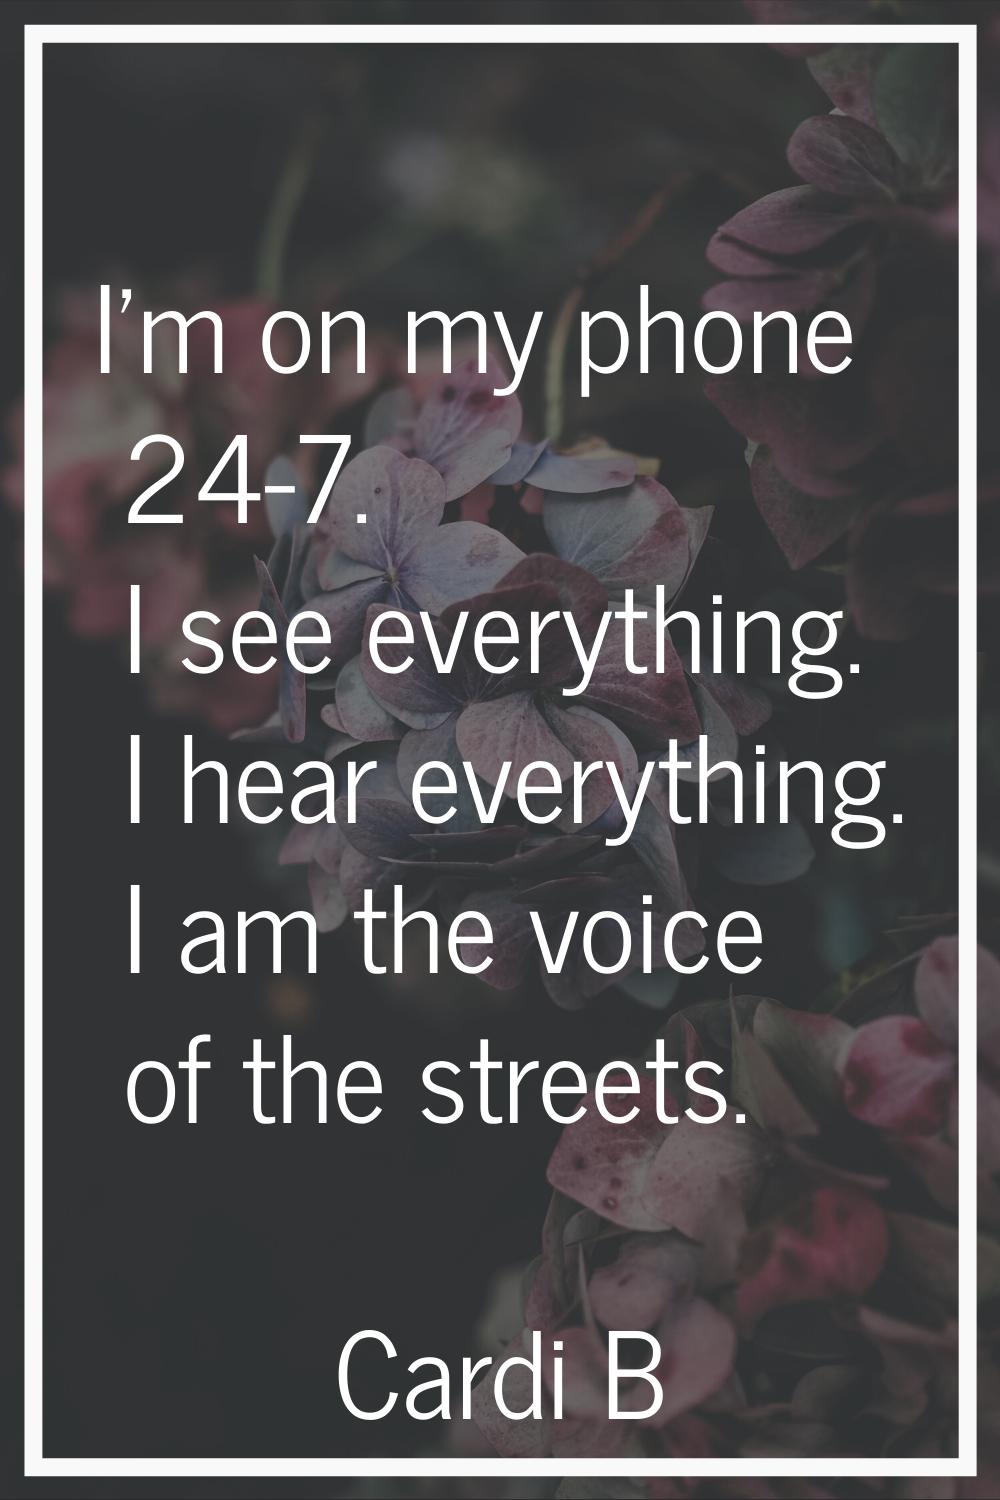 I'm on my phone 24-7. I see everything. I hear everything. I am the voice of the streets.